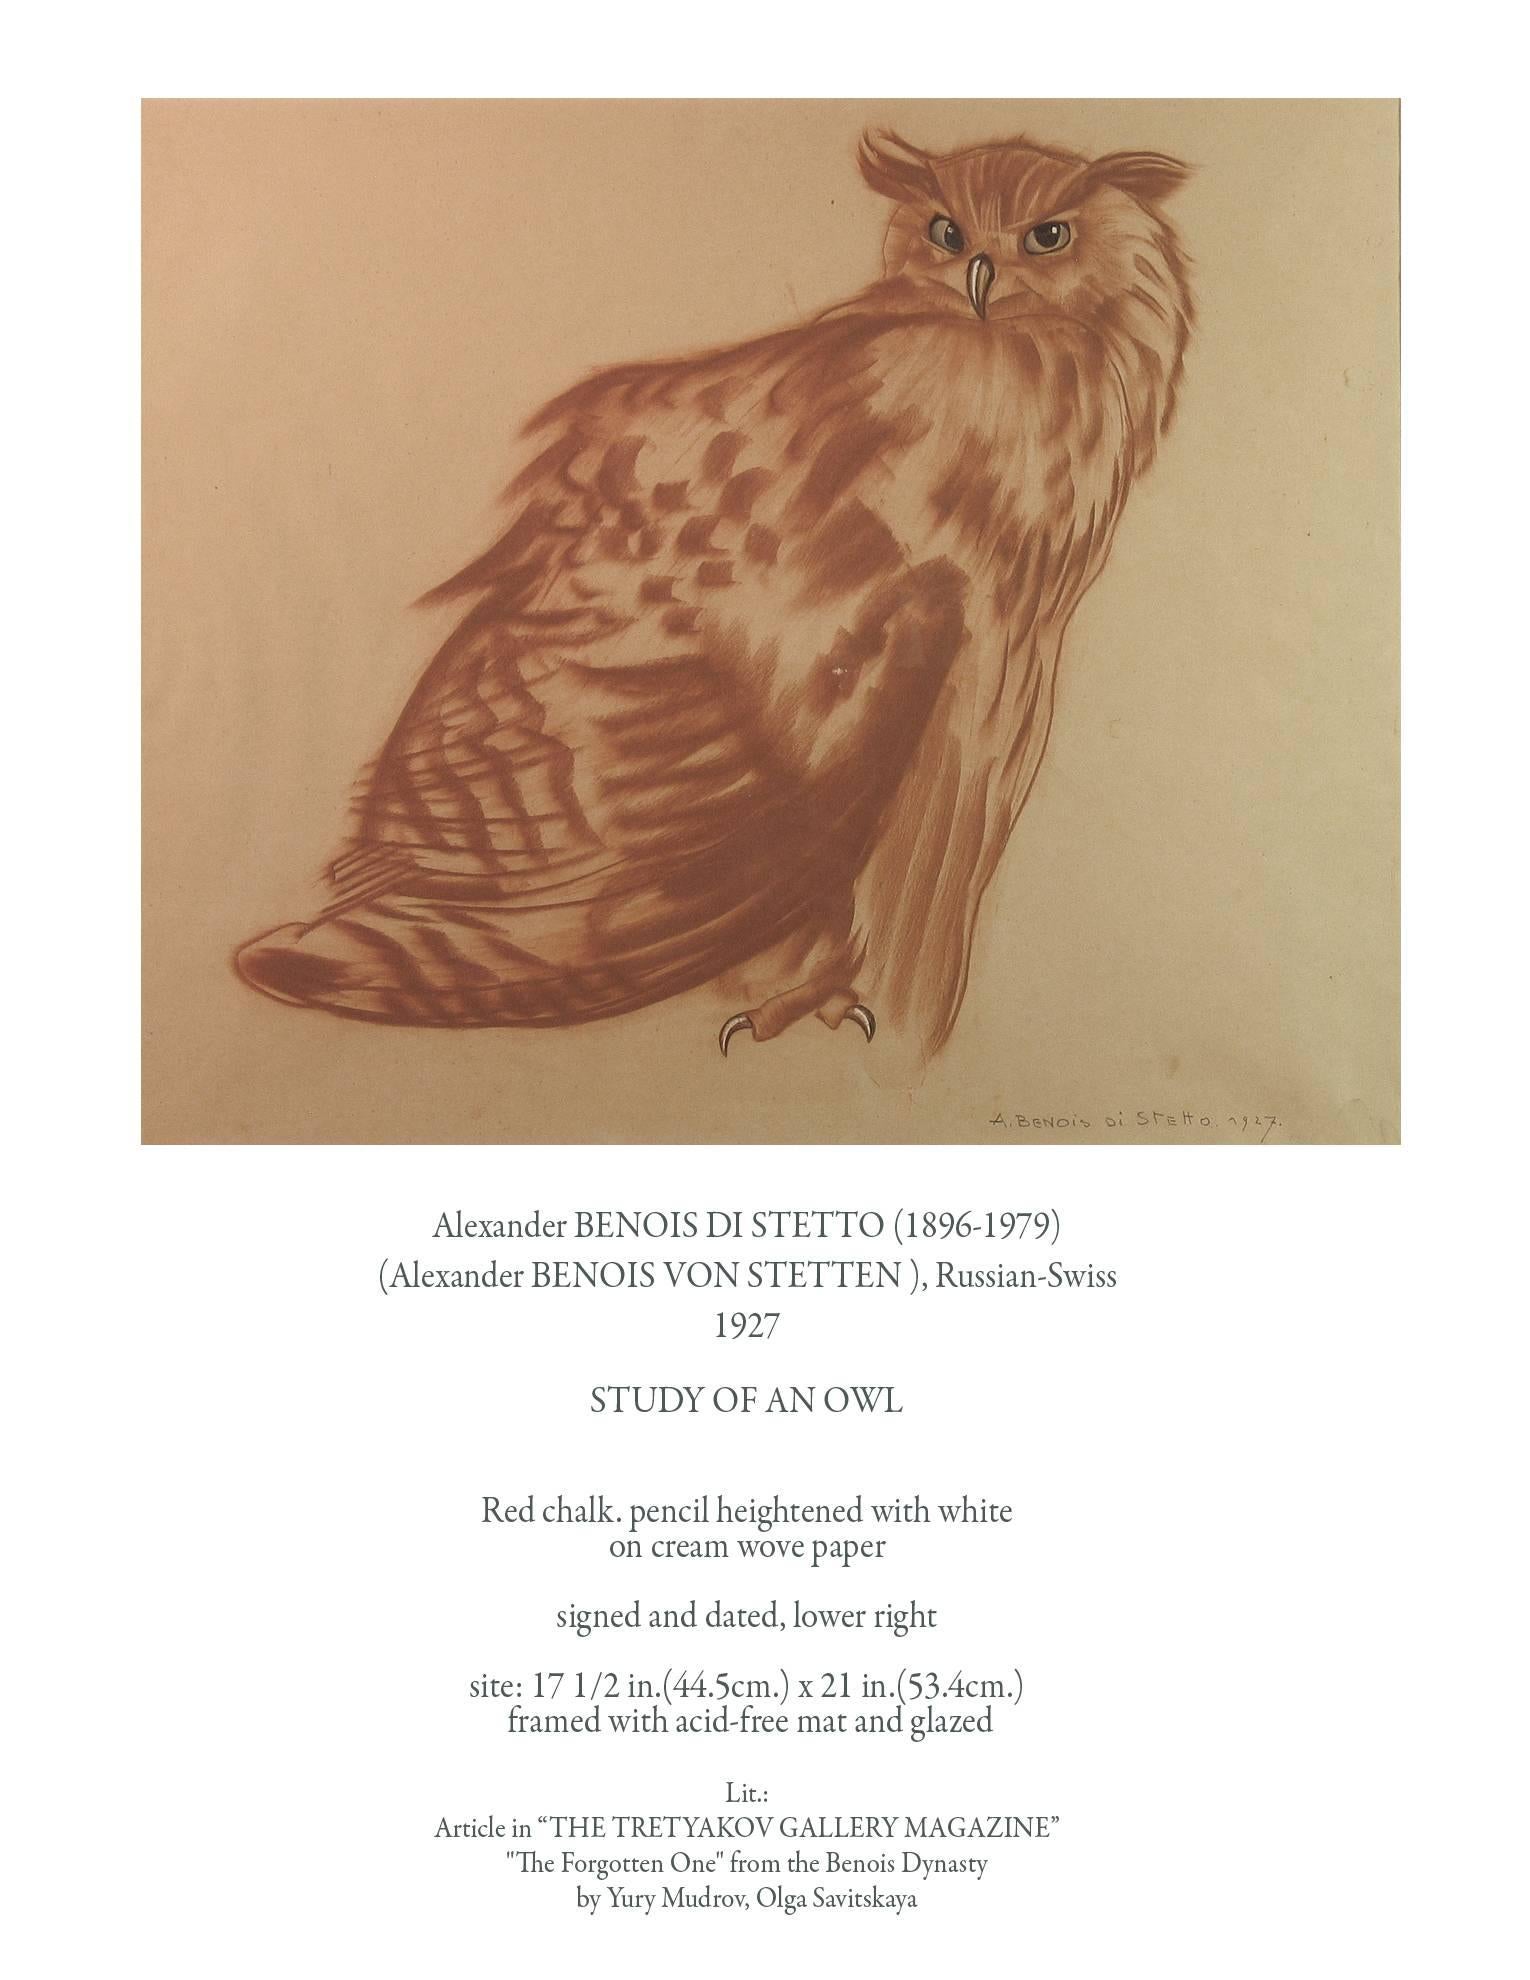 Alexander Benois Di Stetto (1896-1979), (Alexander Benois Von Stetten) Russian-Swiss, 1927. 
Study Of an Owl, Red chalk, Pencil heightened with white on cream wove paper, Signed and dated on lower right.  Size 17 1/2"-inches x 21"-inches x